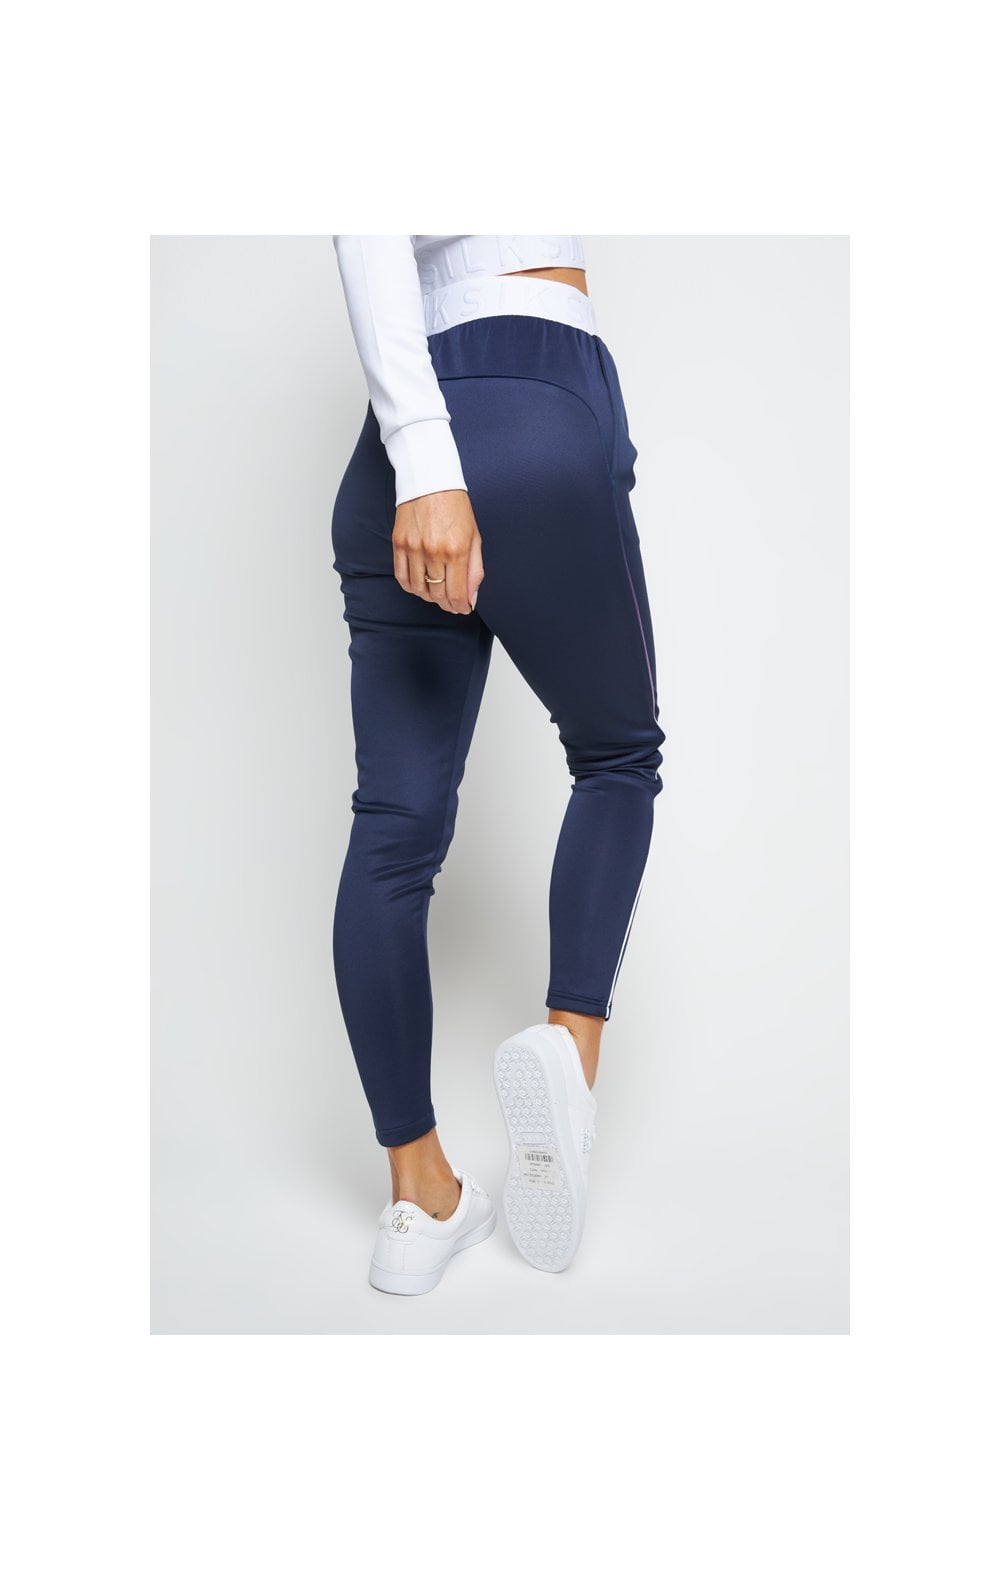 Load image into Gallery viewer, SikSilk Violet Fade Track Pants - Navy (1)